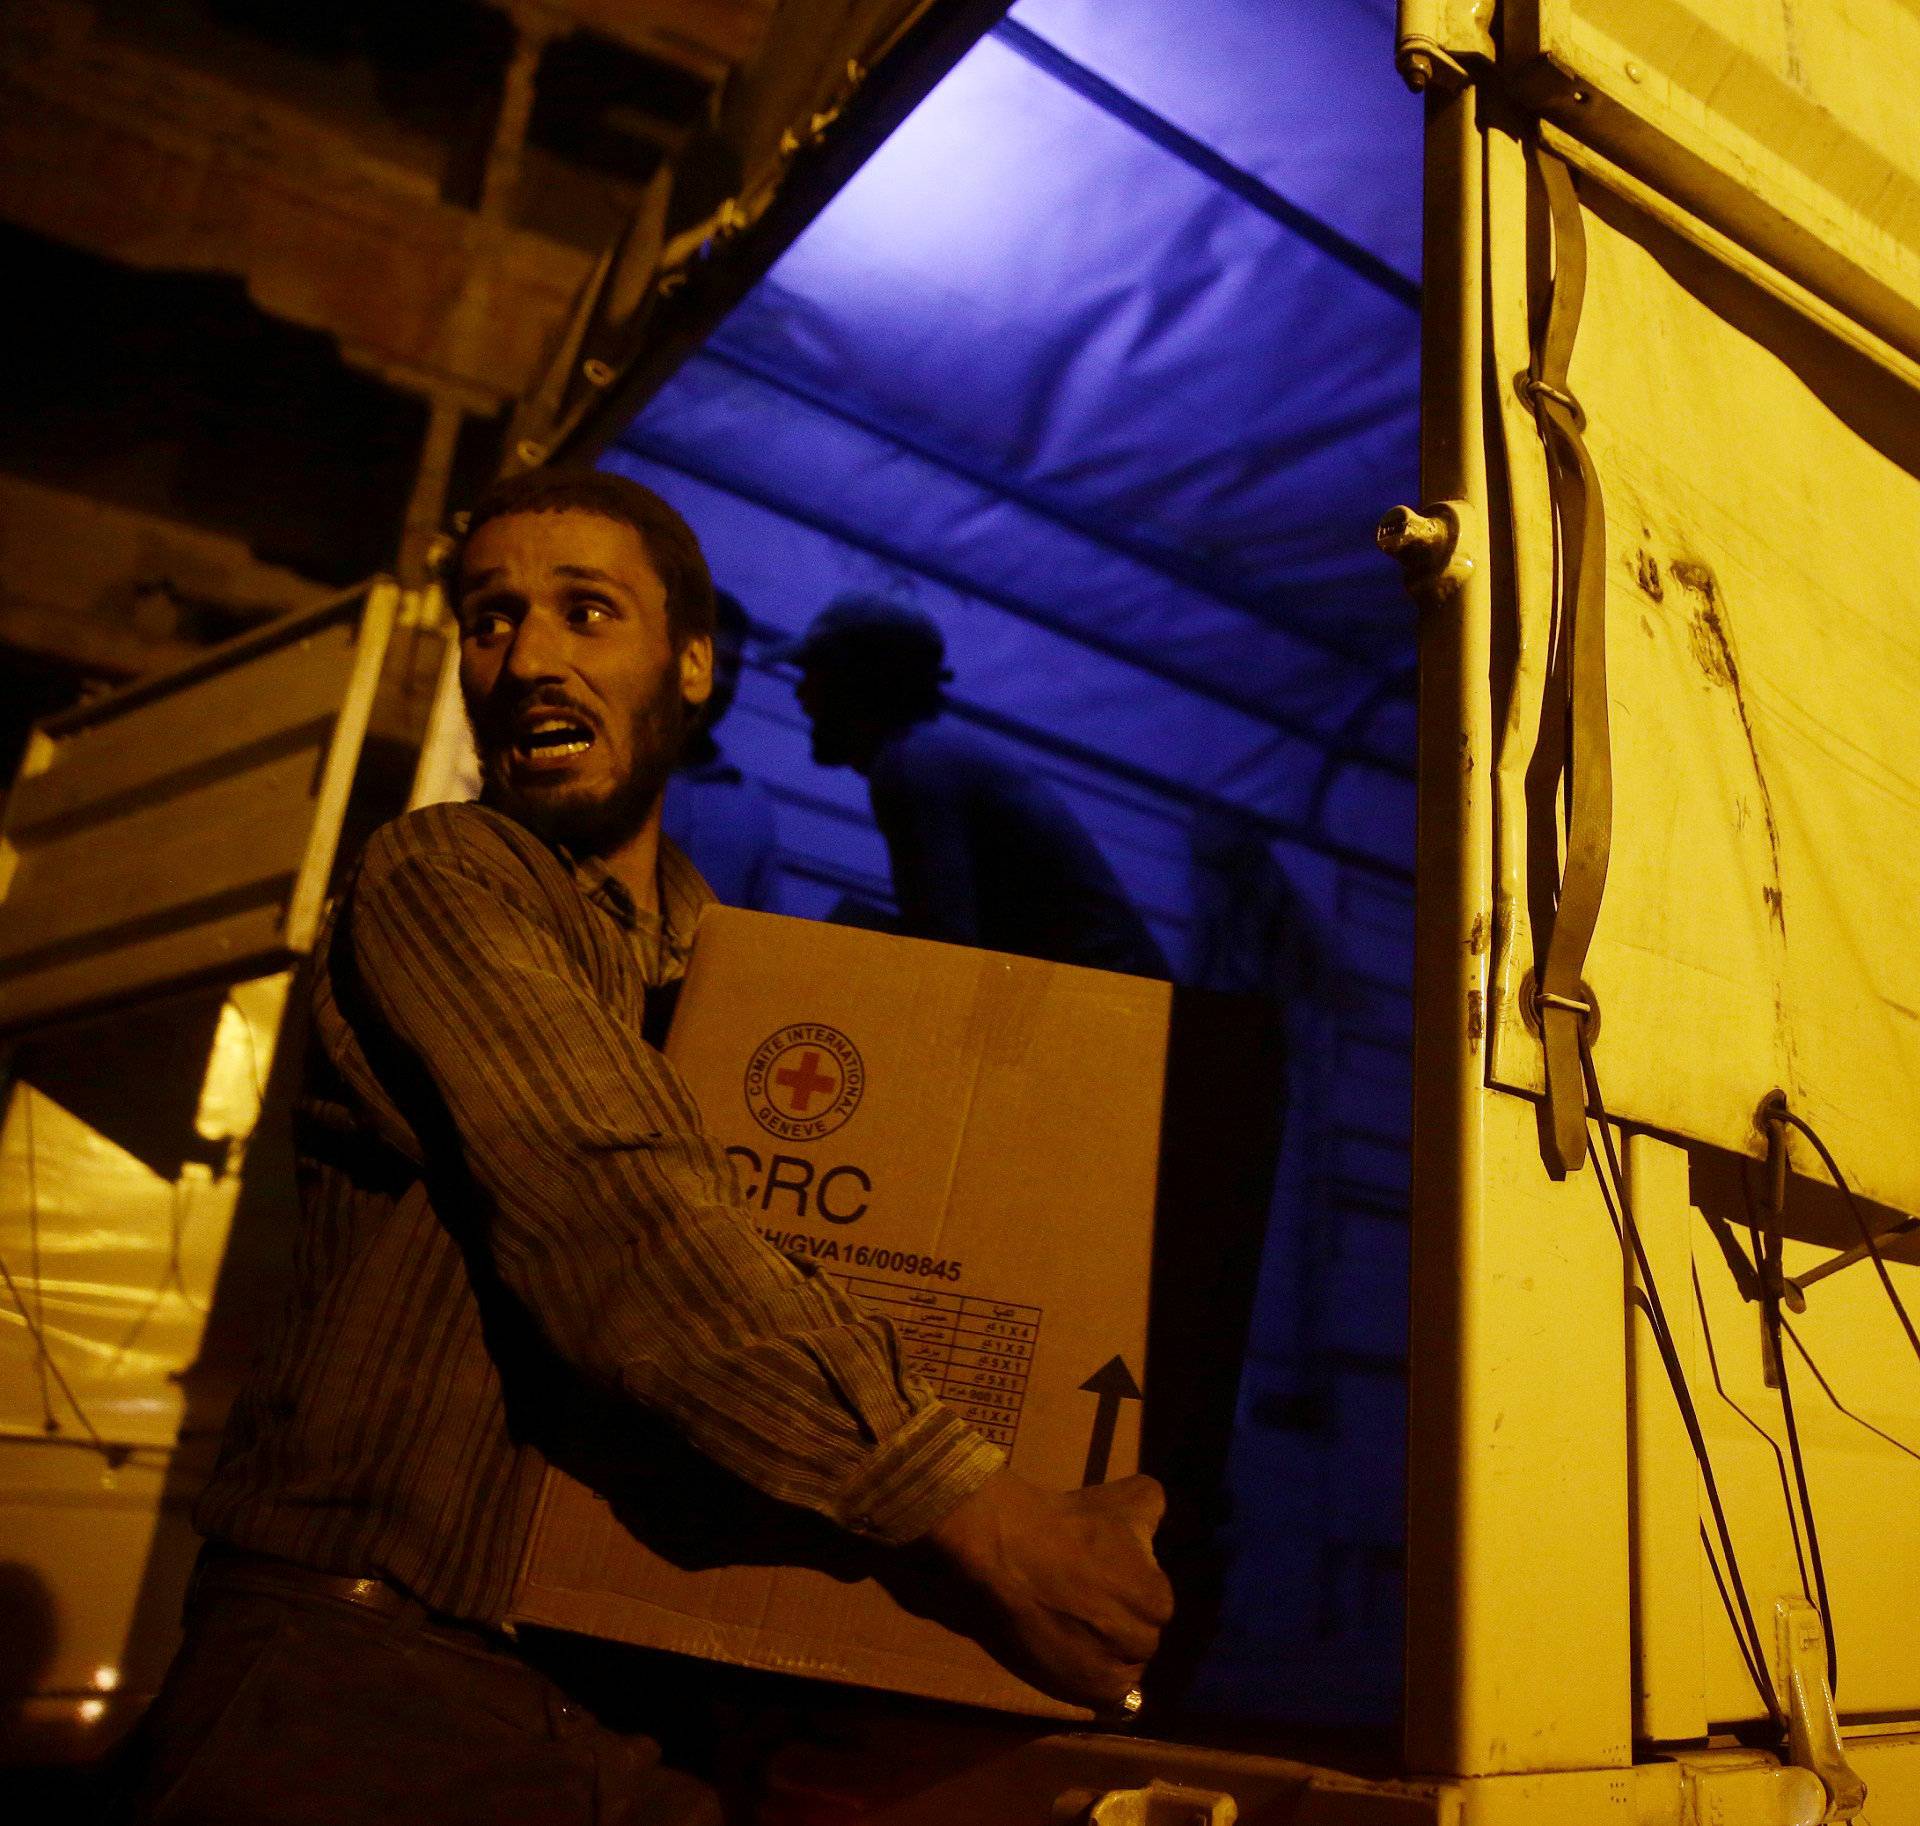 Relief workers unload parcels of humanitarian aid in the rebel-held besieged Syrian town of Douma